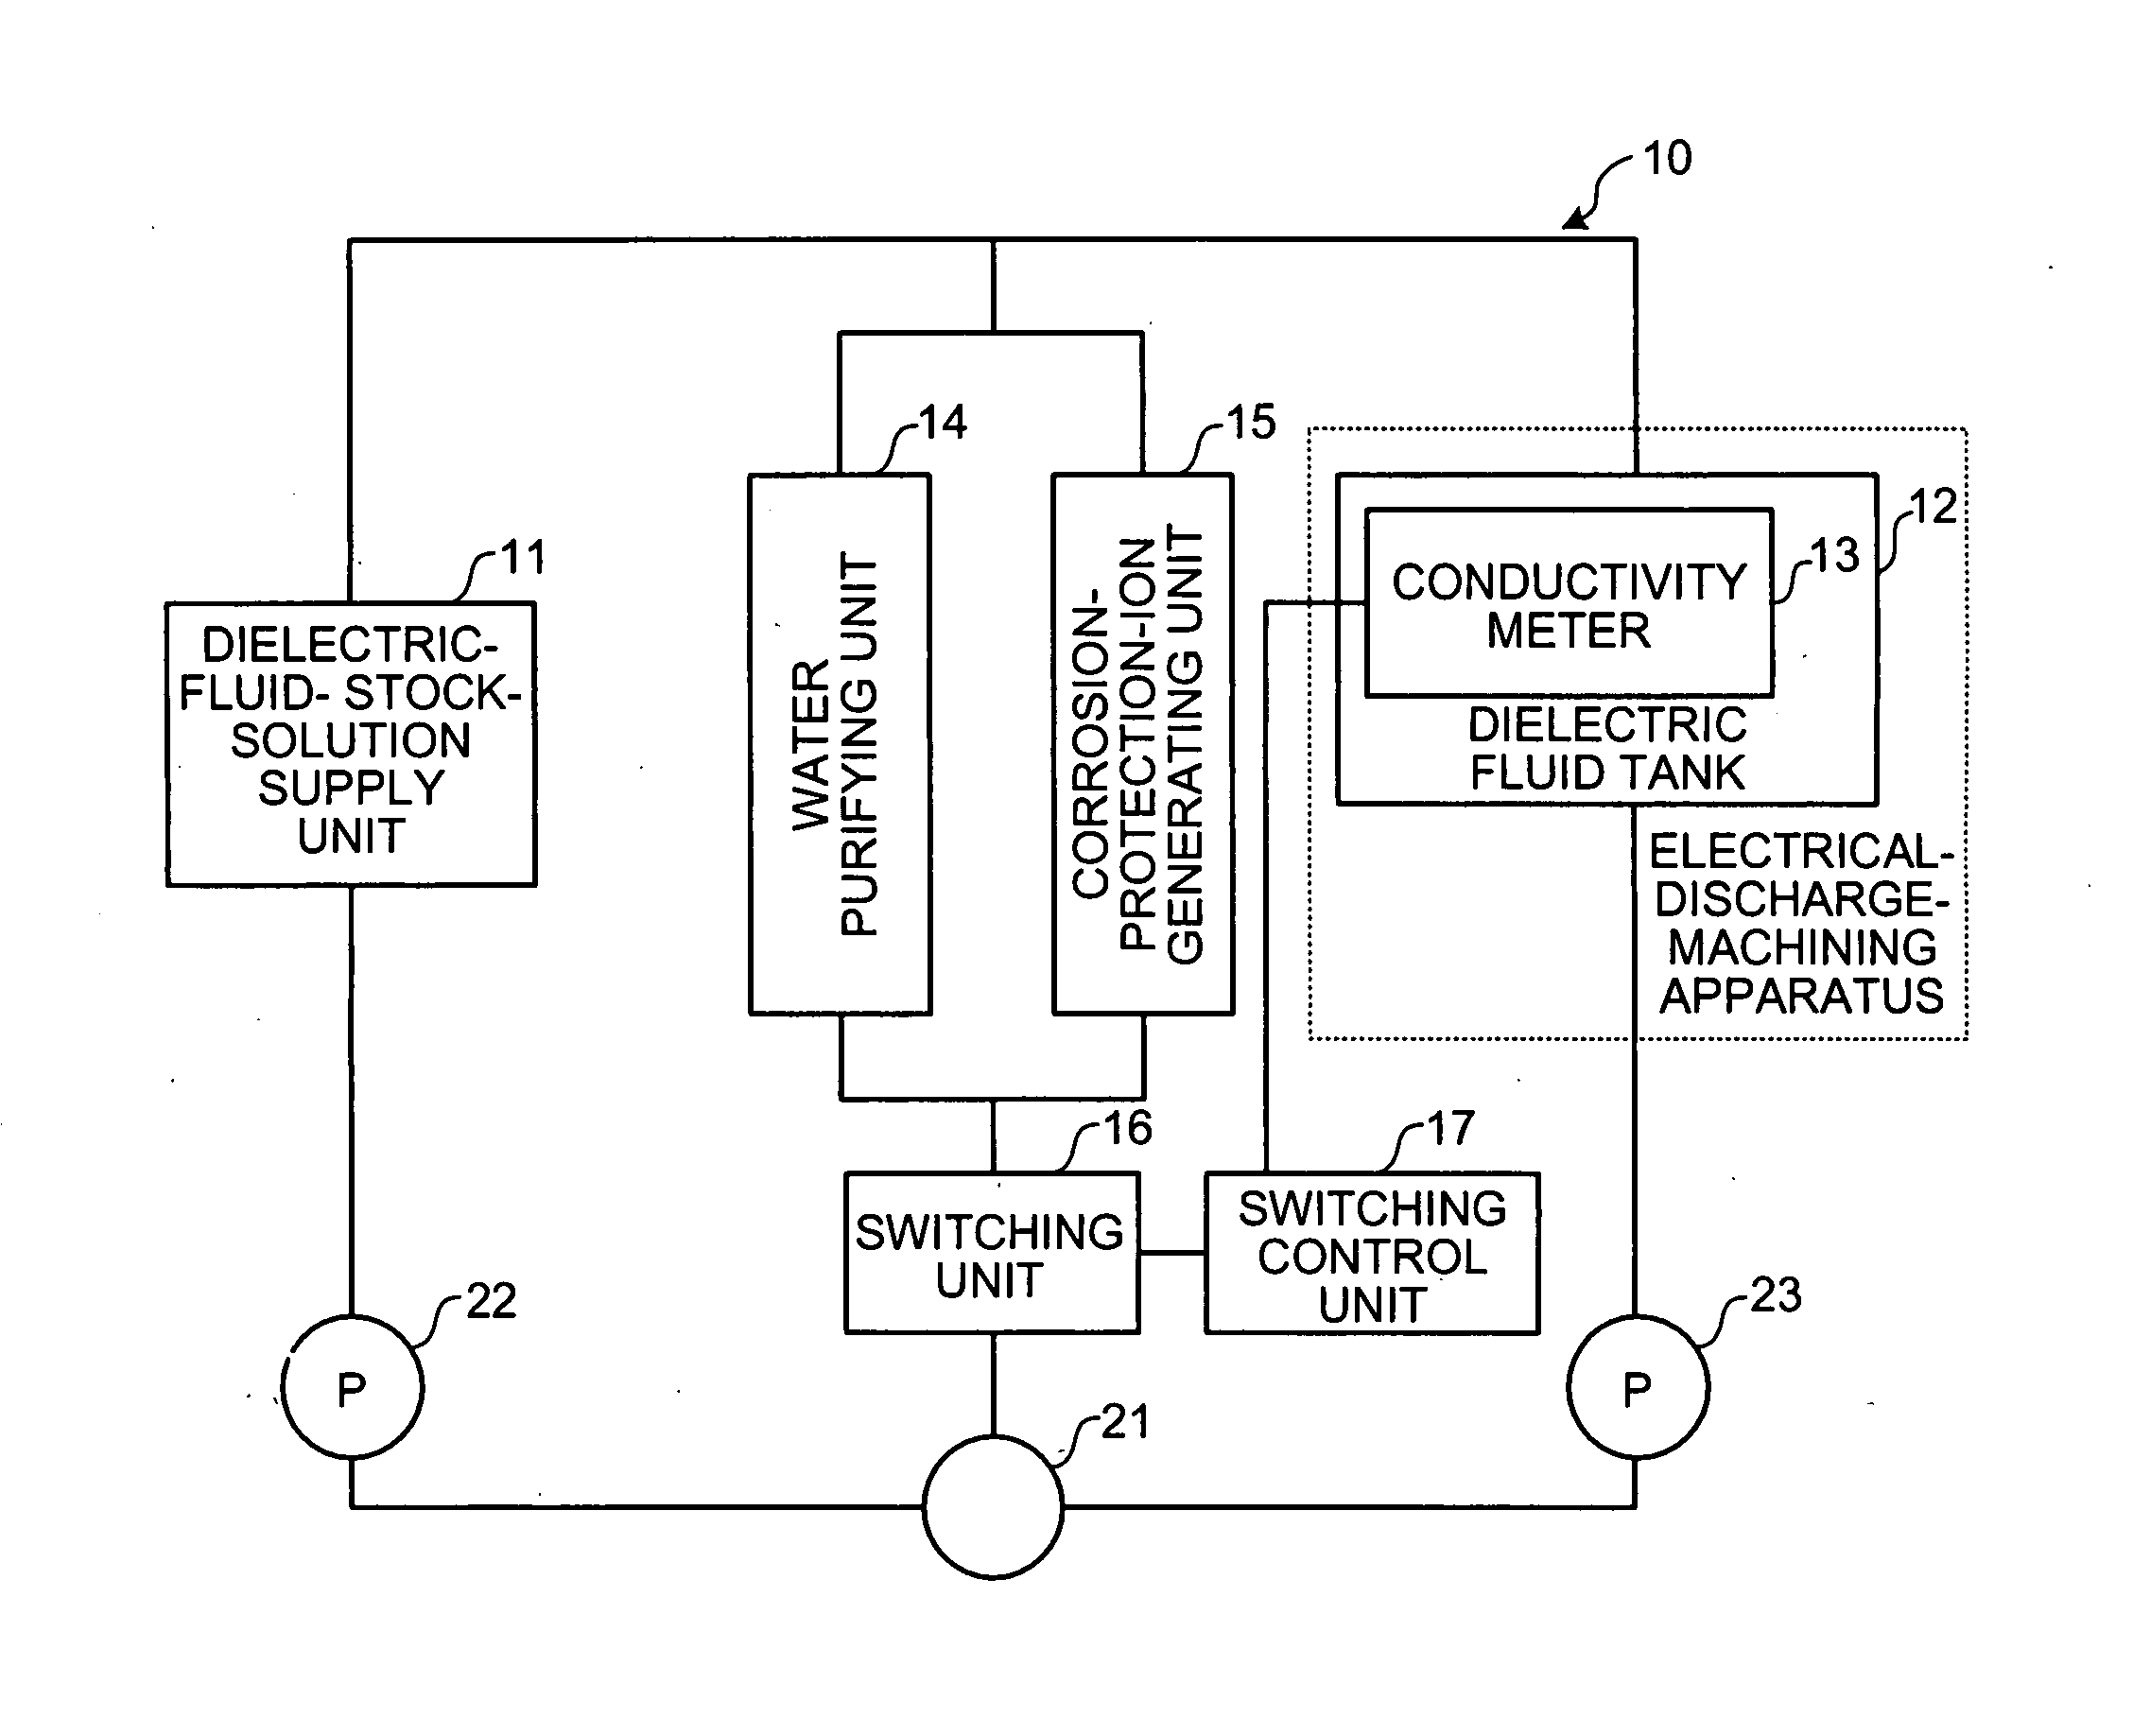 Dielectric-Fluid Quality Control Apparatus and Electrical-Discharge Machining Apparatus